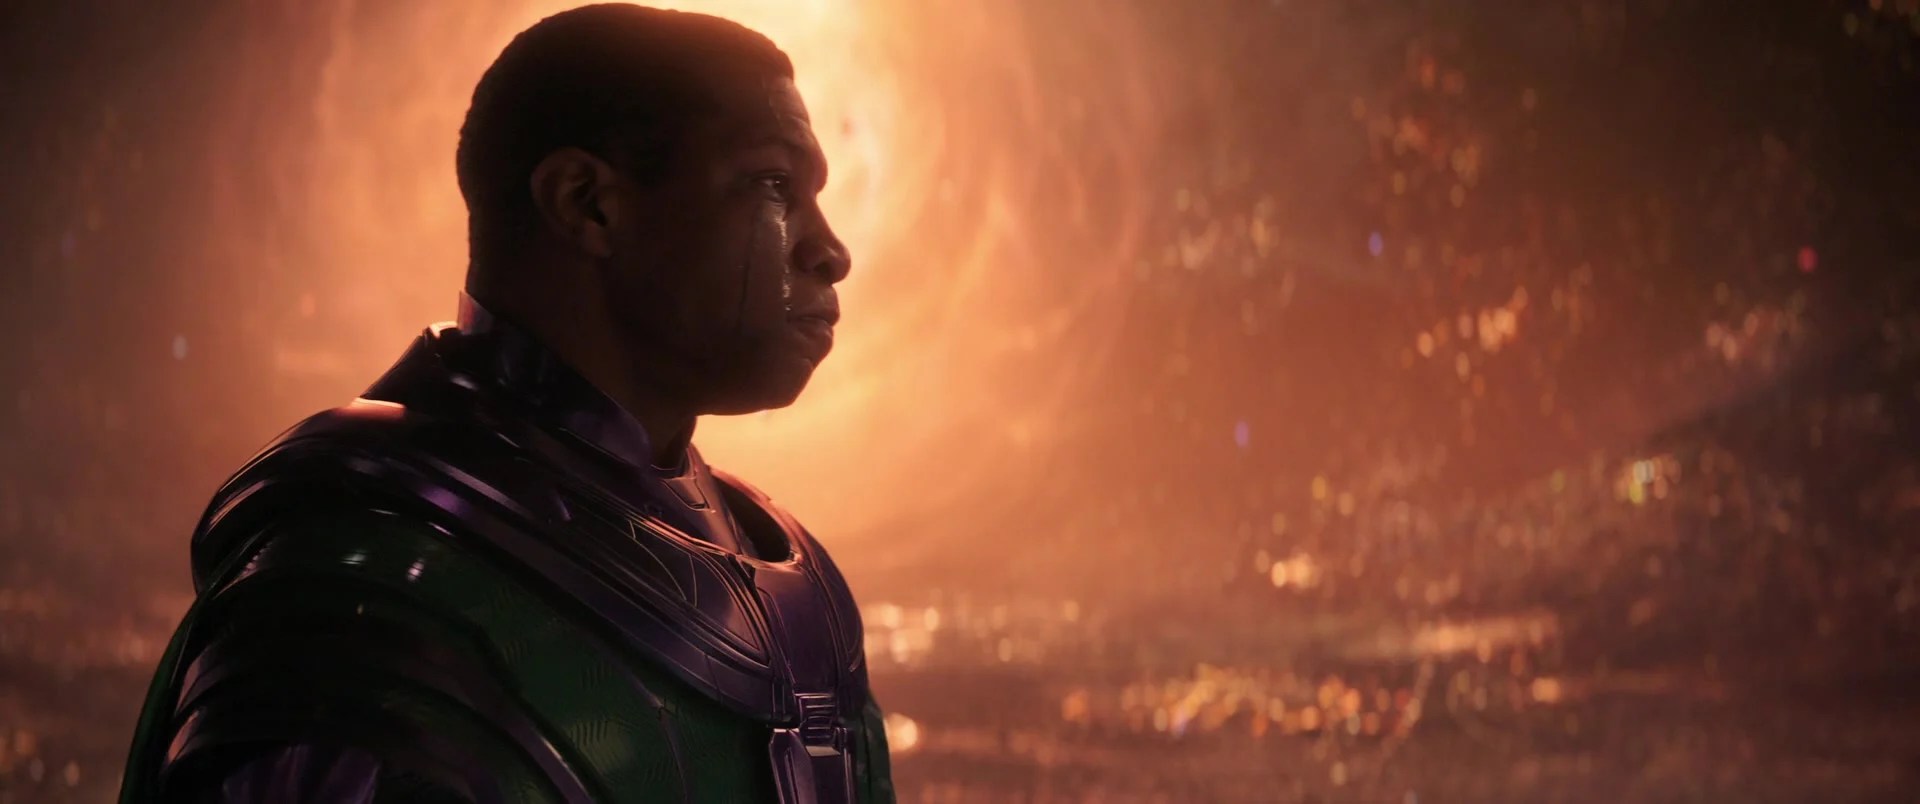 Kang the Conqueror (Jonathan Majors) prepares to force his way out of the Quantum Realm in Ant-Man and the Wasp: Quantumania (2023), Marvel Entertainment